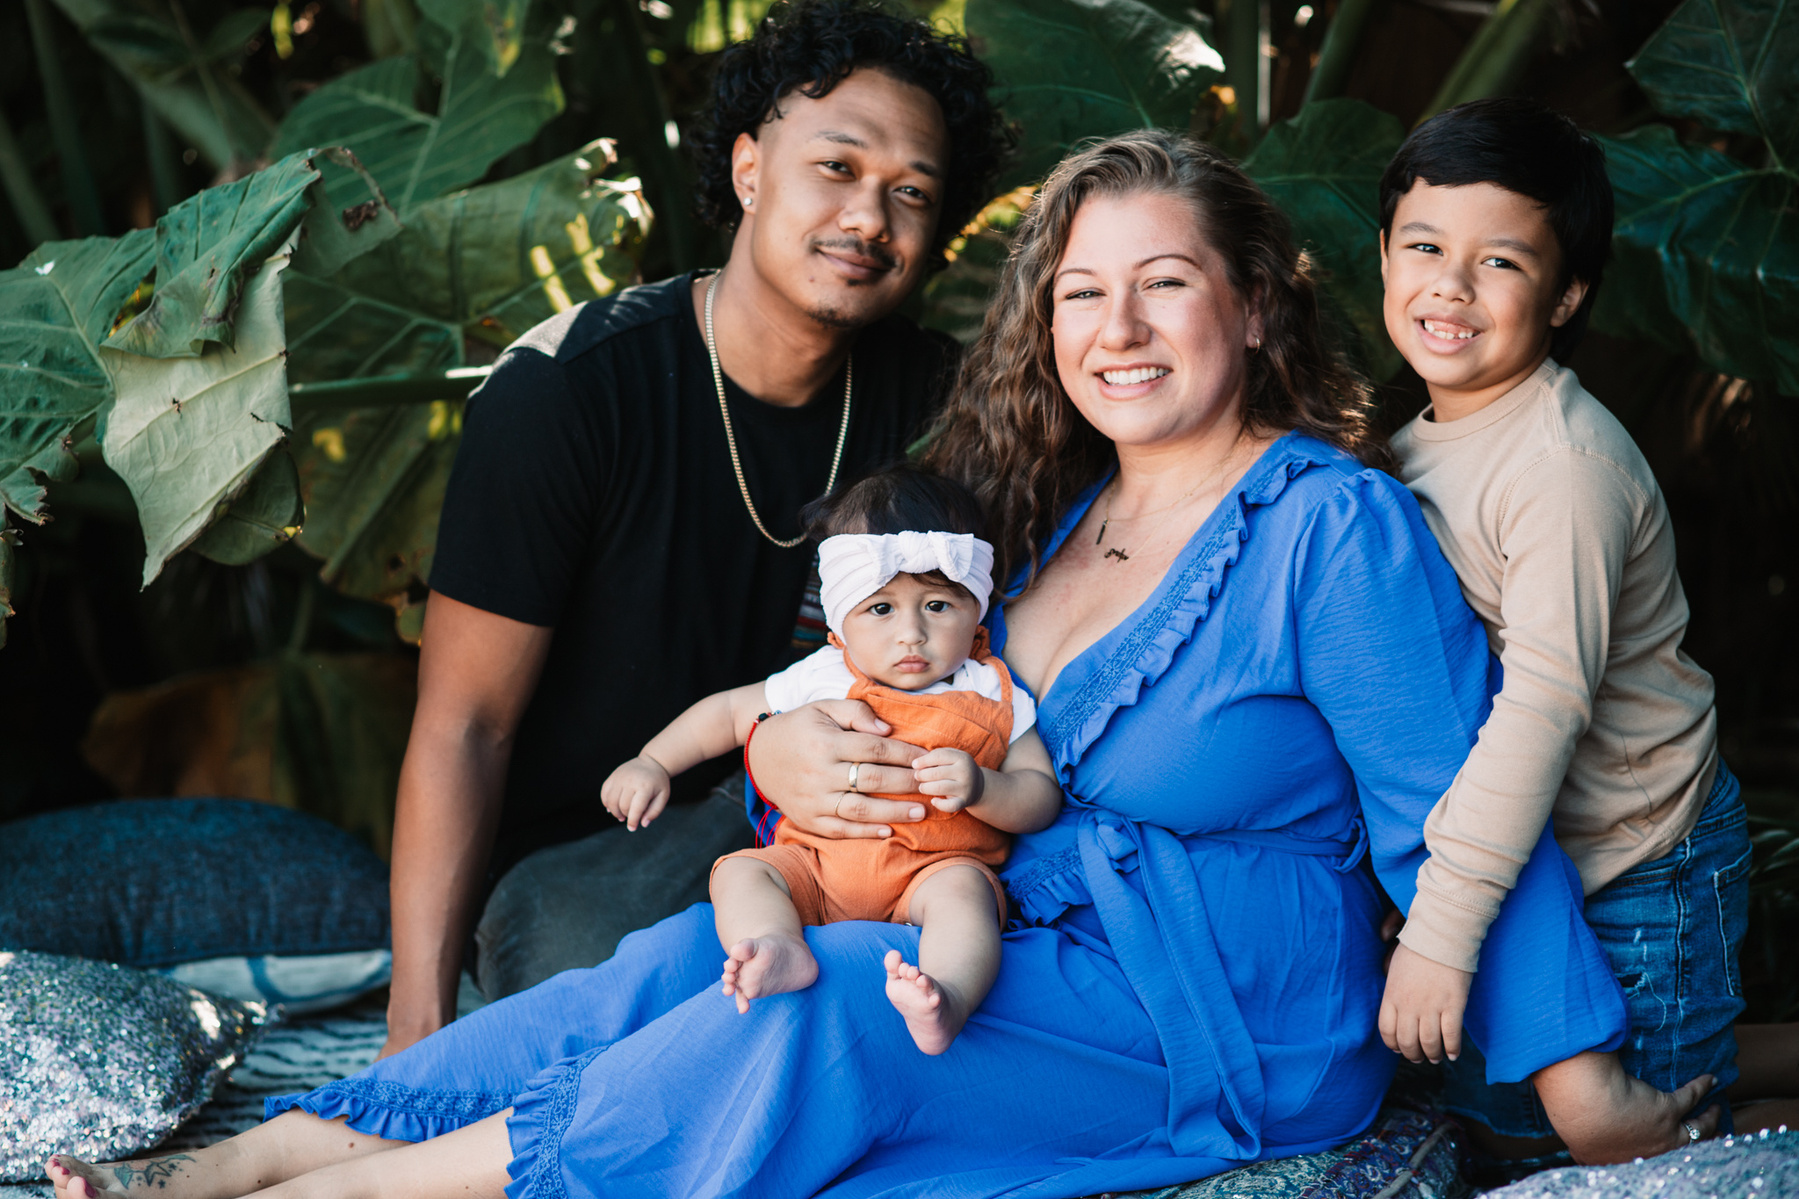 South Florida Family Portrait Session with Shaina, Kerry, Braylon and Kassidy